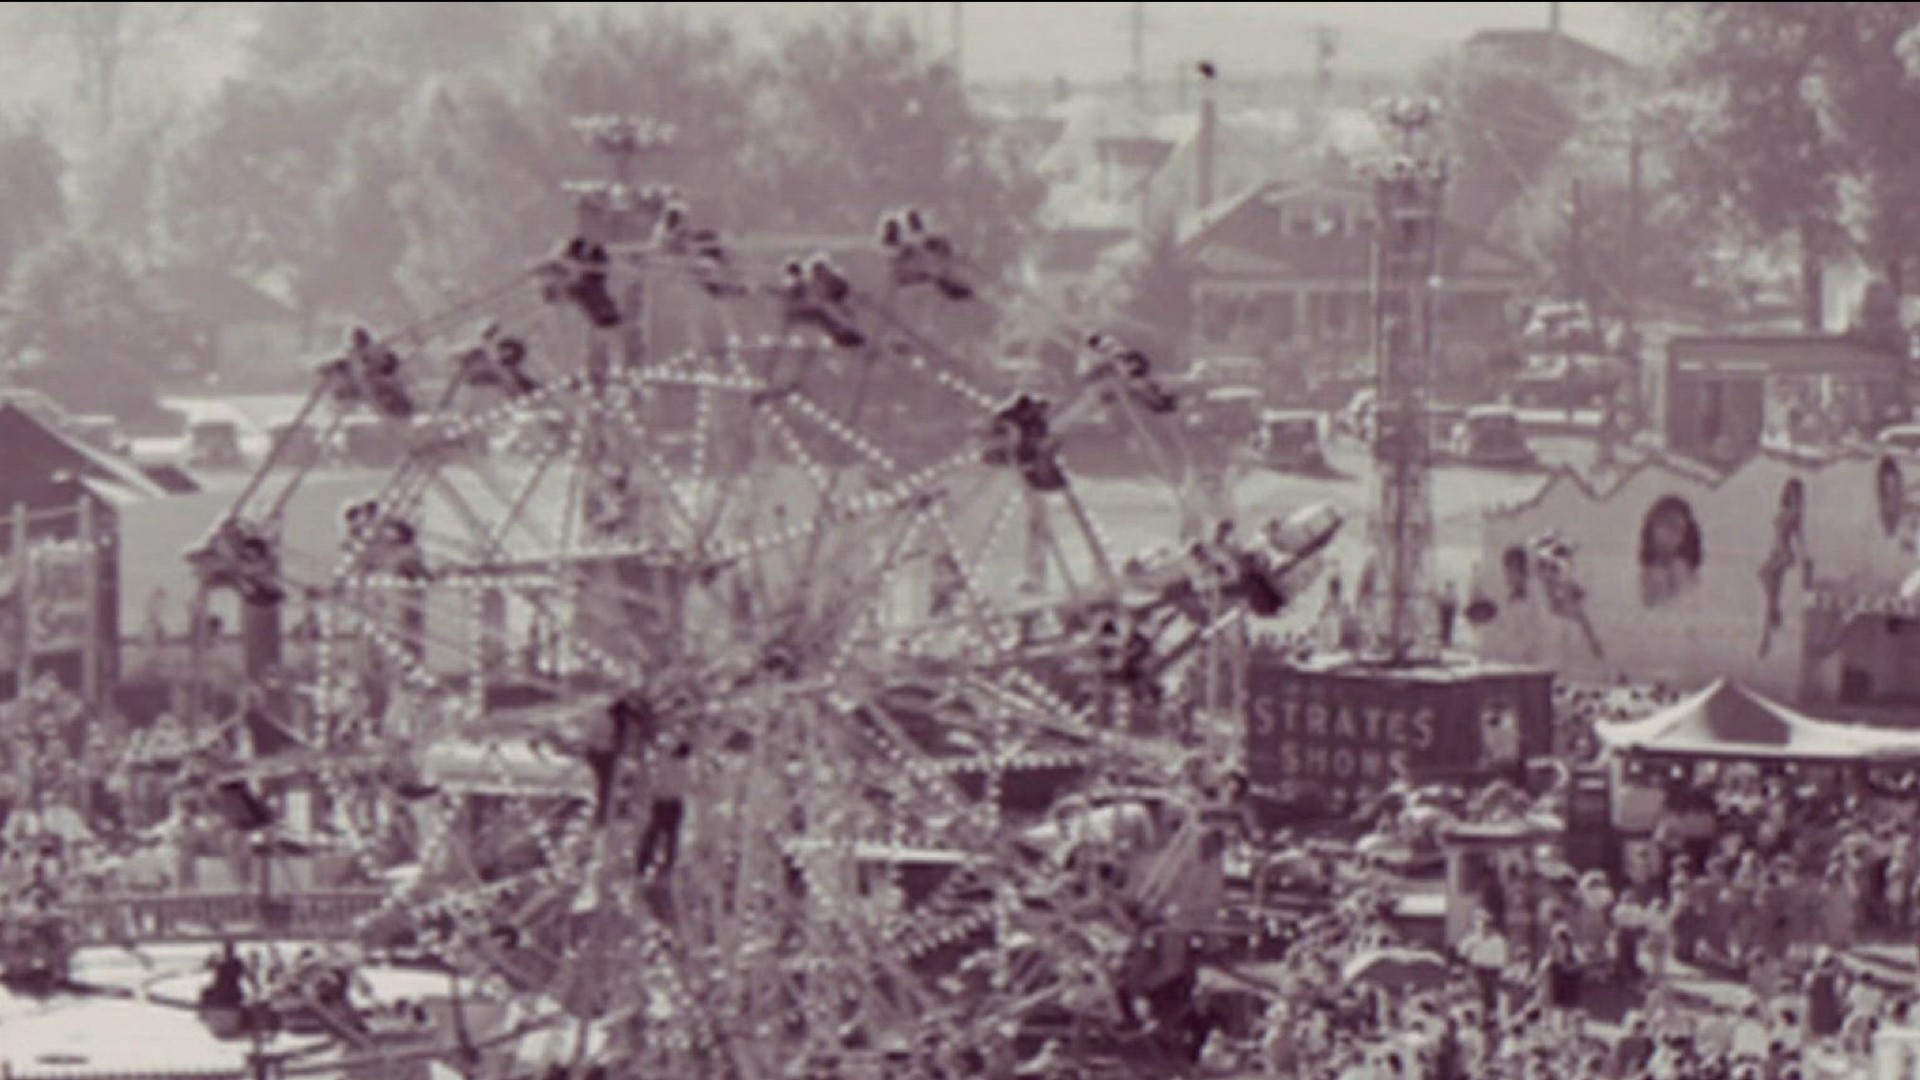 Take a peek at how things have changed over the years at America's Oldest Fair.